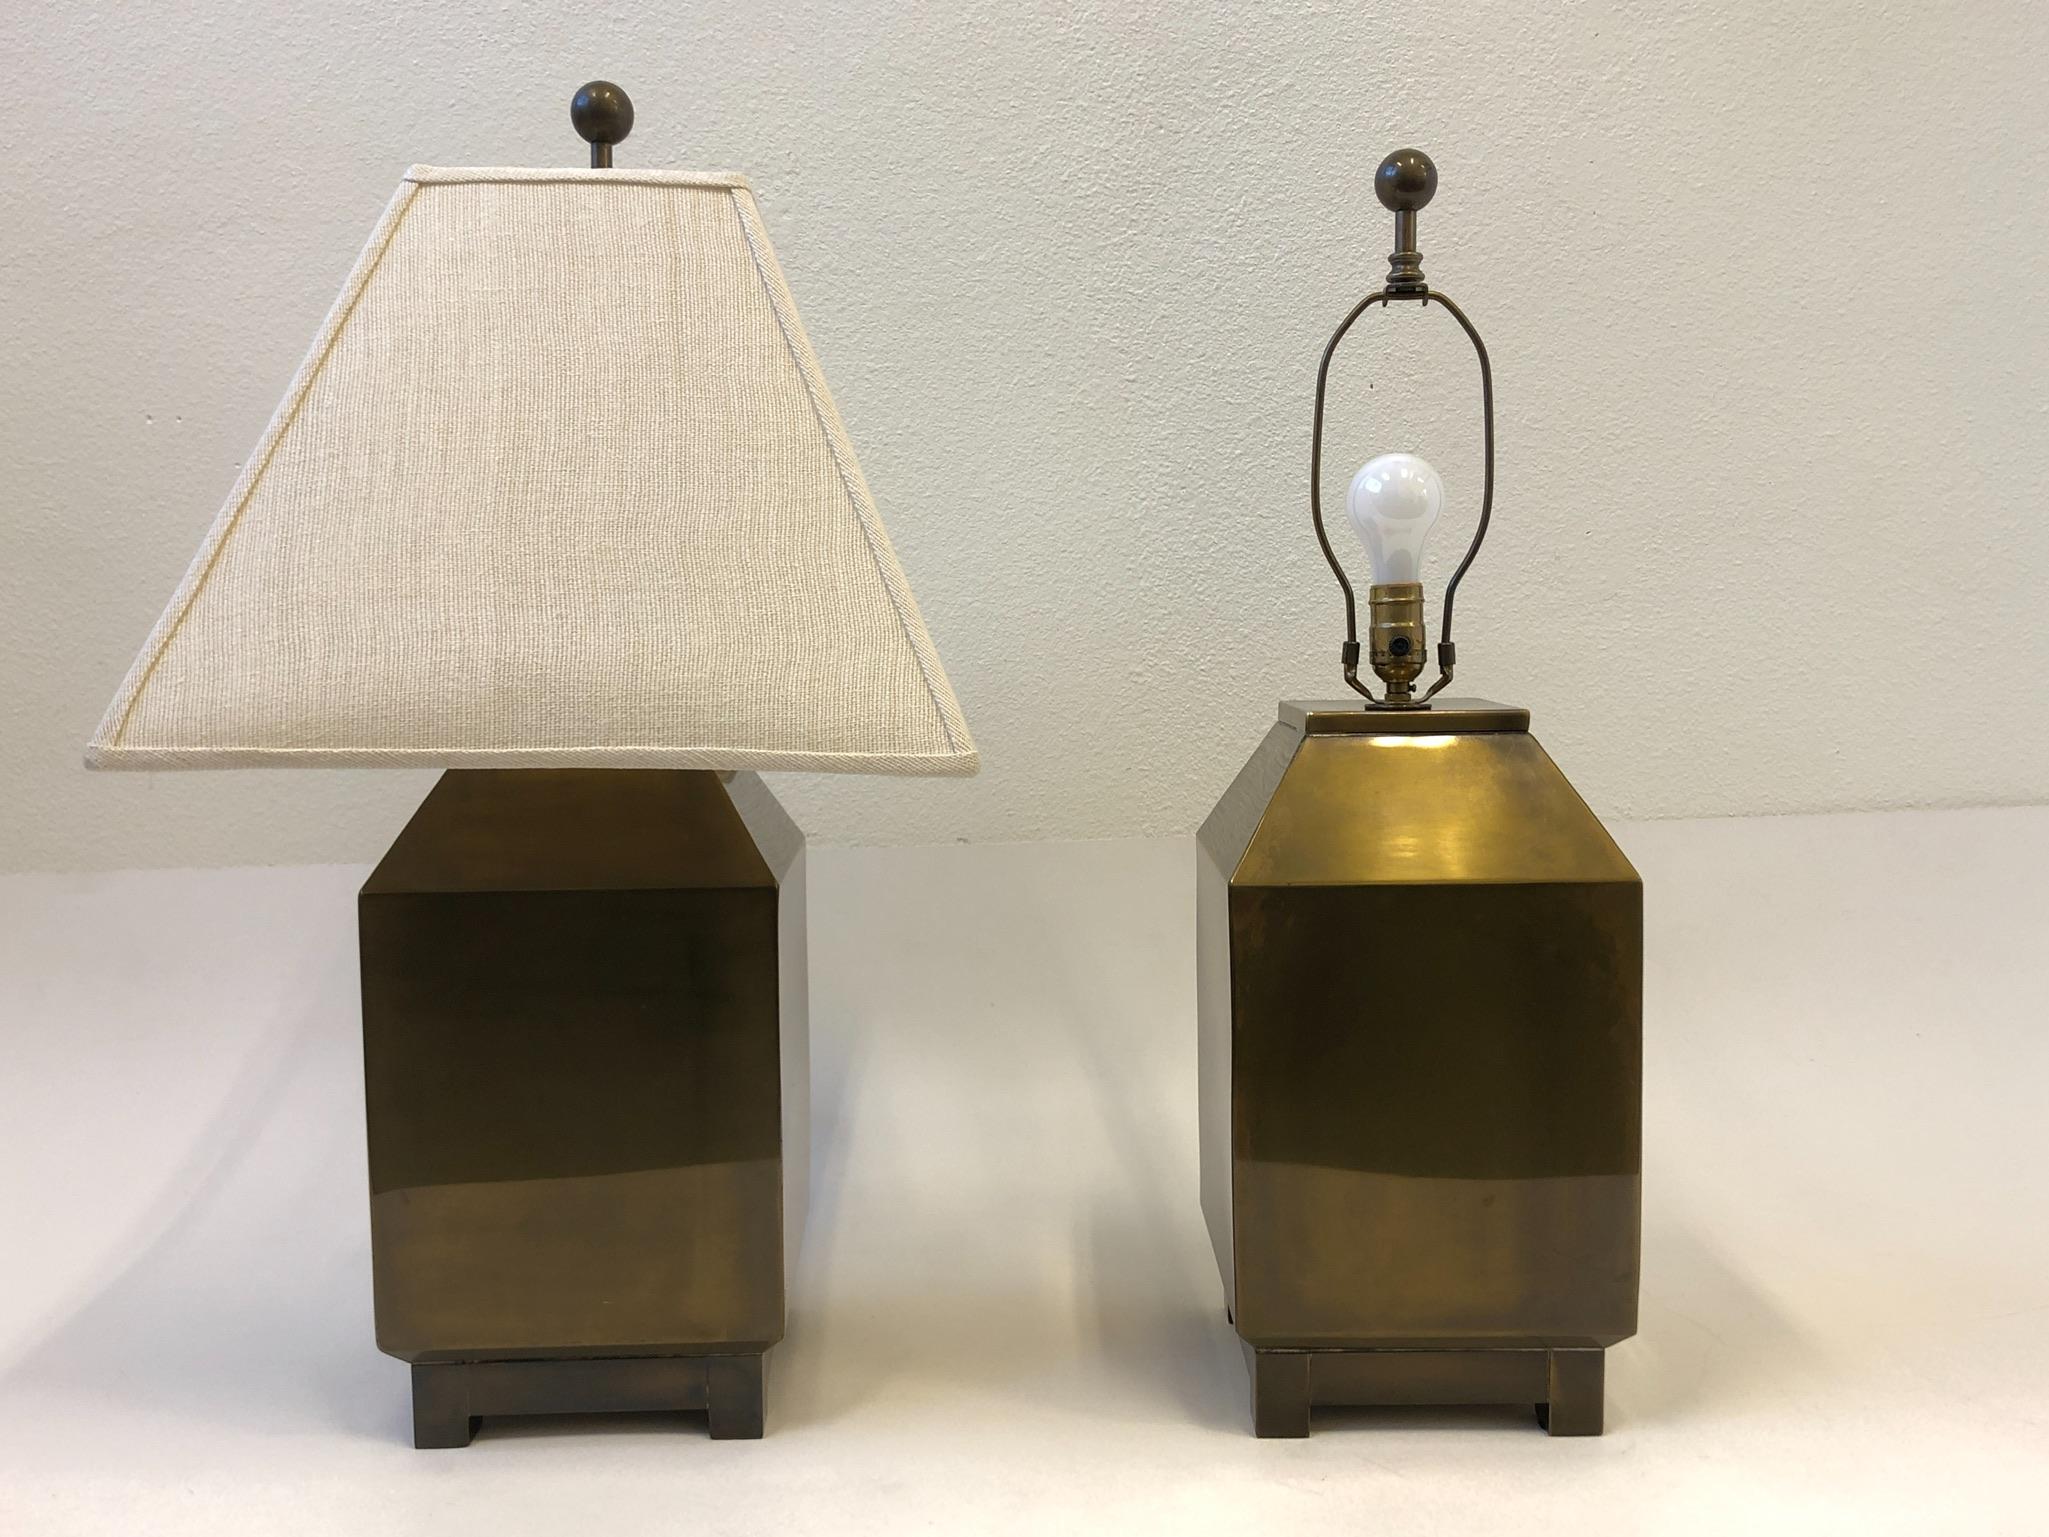 A beautiful pair of solid aged brass table lamp designed by Mastercraft in the 1970s.
The lamps have that beautiful aged brass patina that Mastercraft is known for. The lamps have been newly rewired and have a three way socket. 

Overall